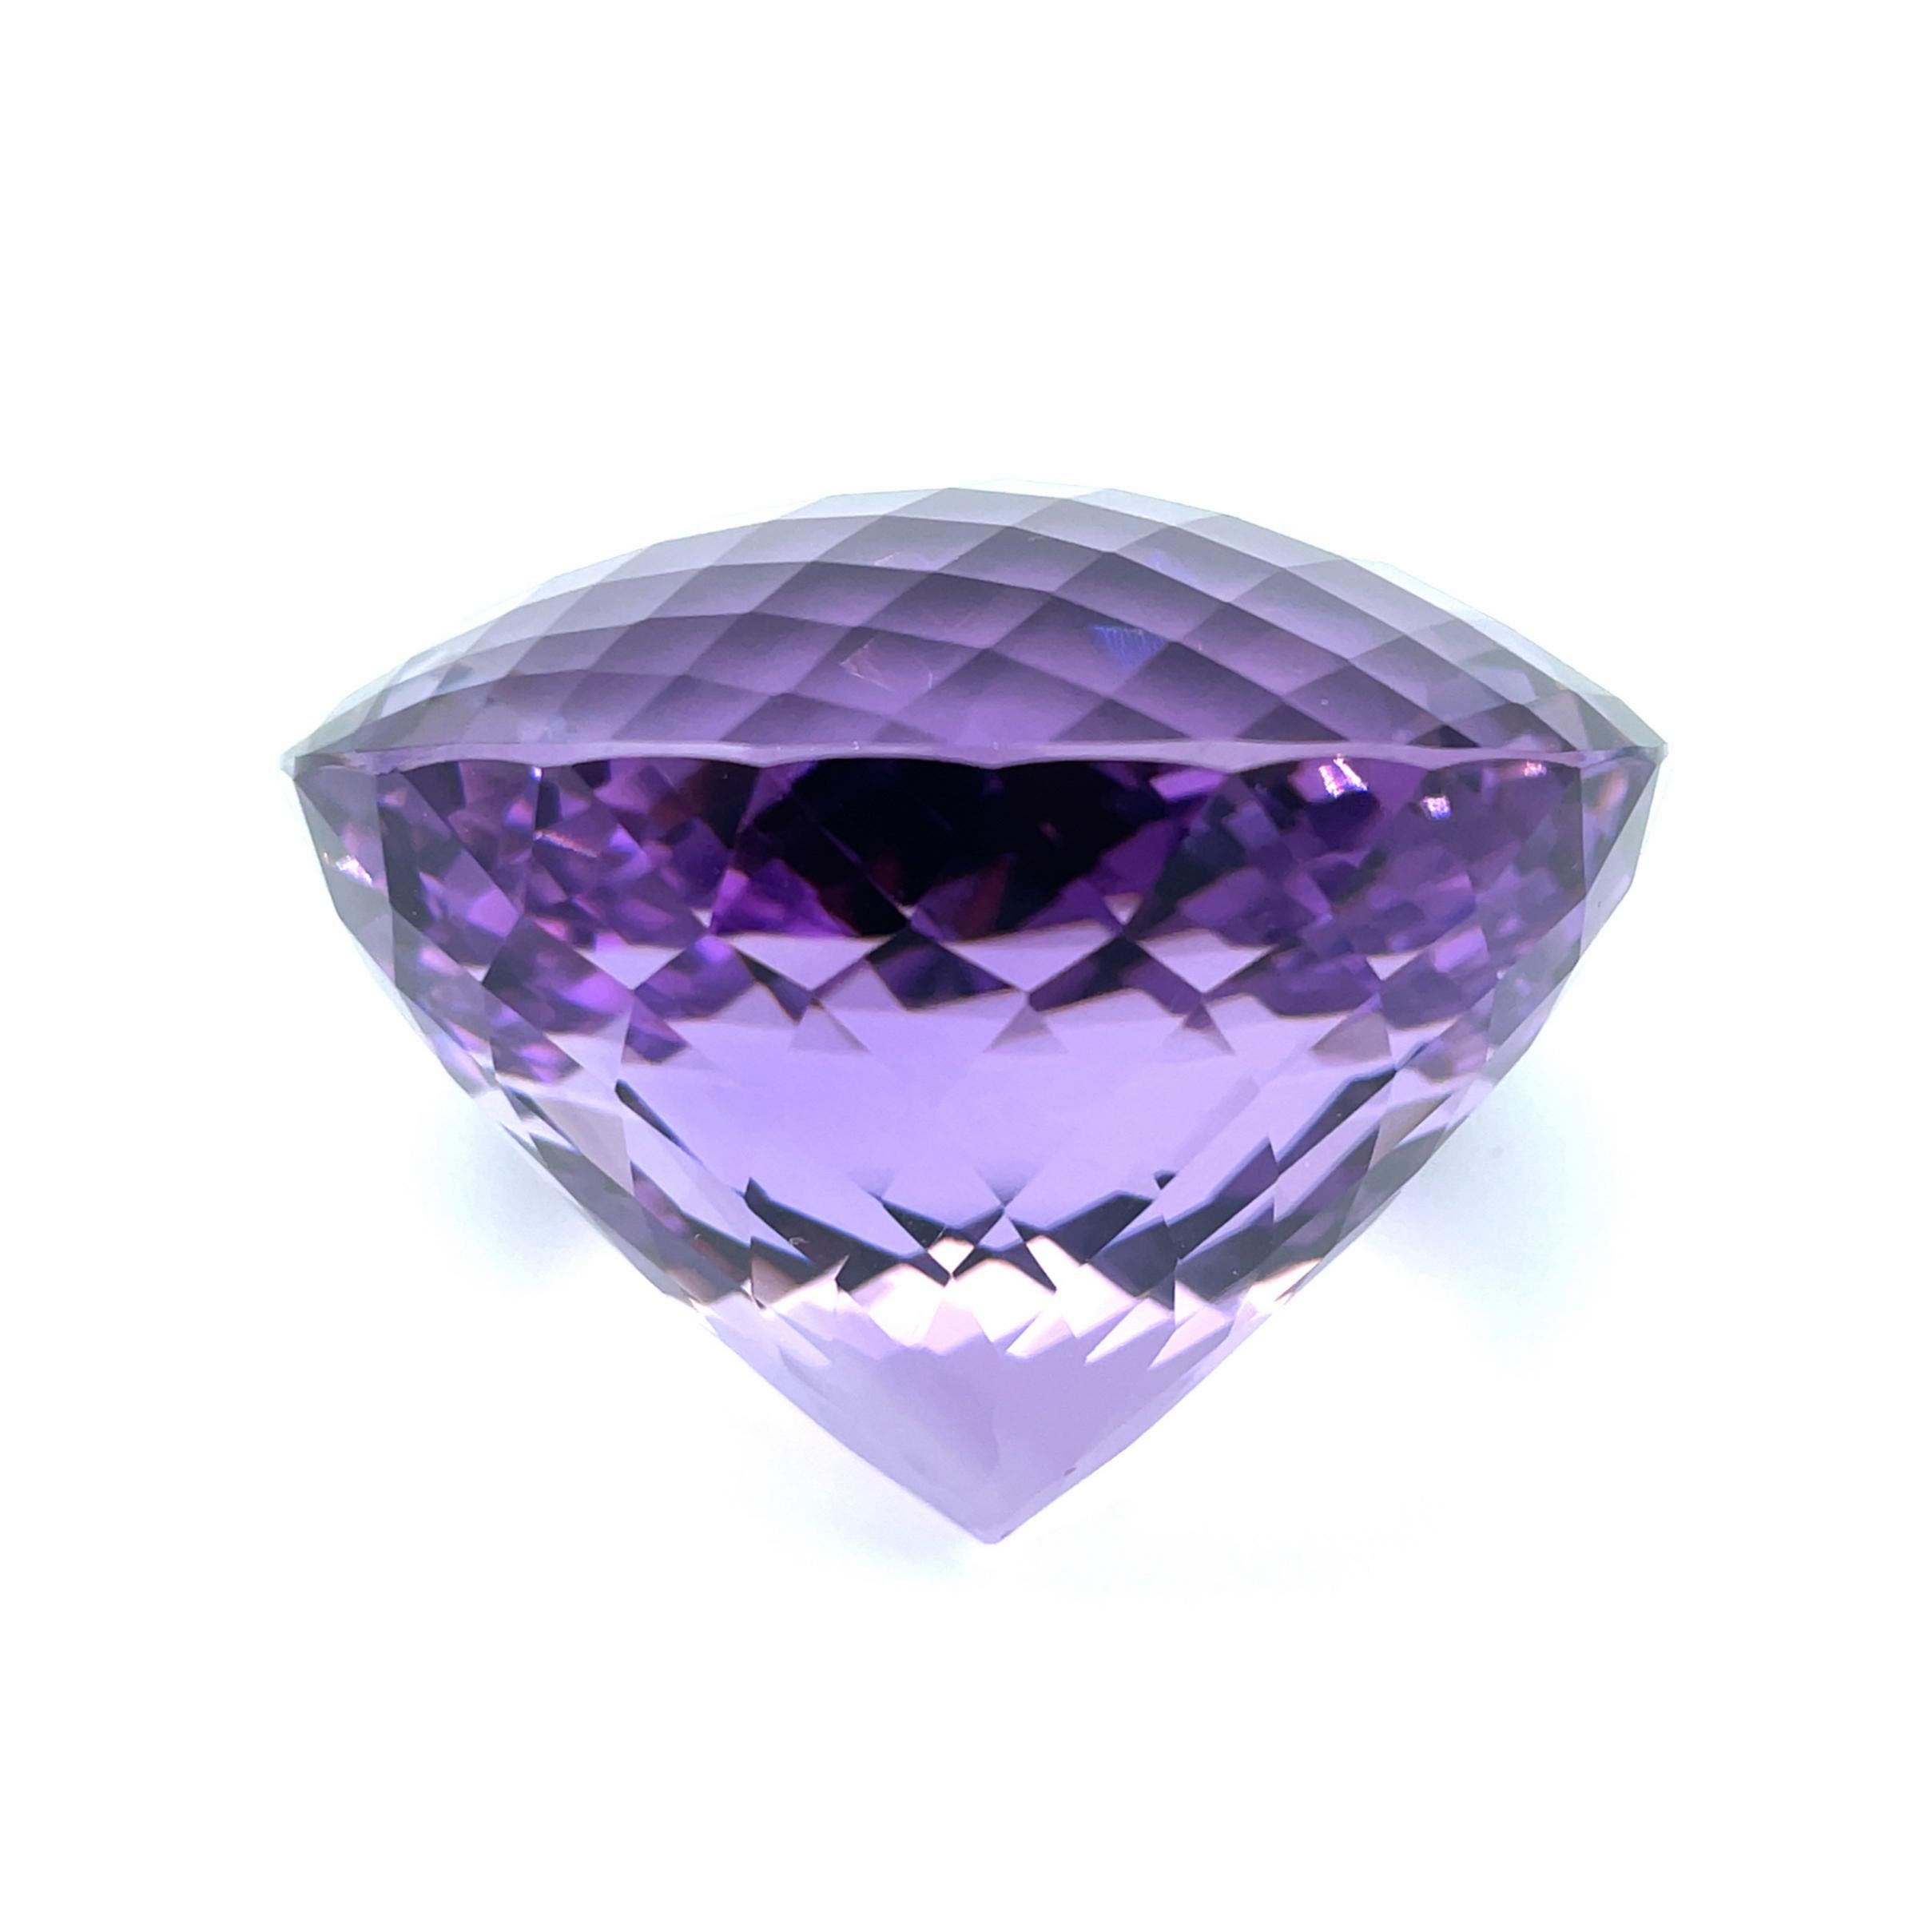 Artisan 651 Carat Round Faceted Checkerboard Amethyst Collector Gemstone  For Sale